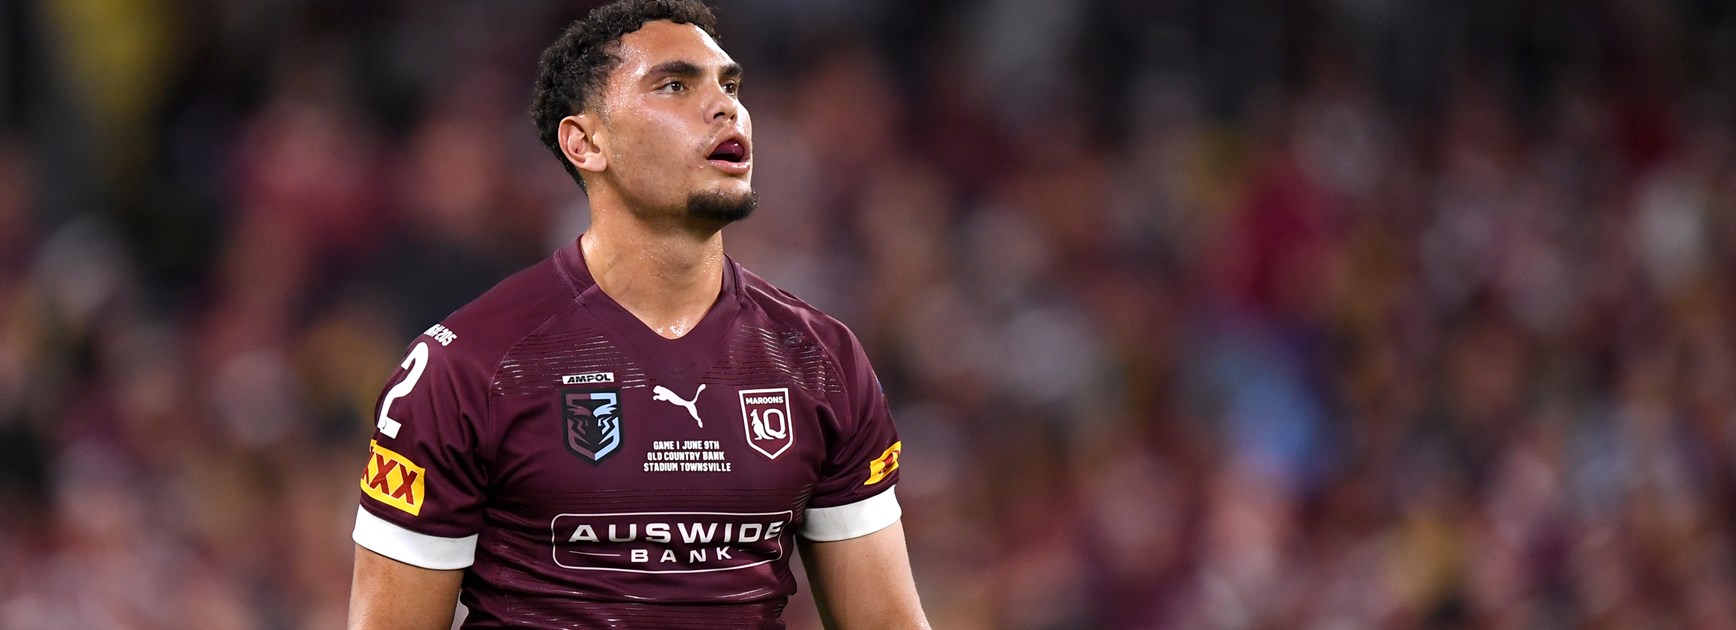 Coates to start, Molo to debut as Maroons confirm lineup